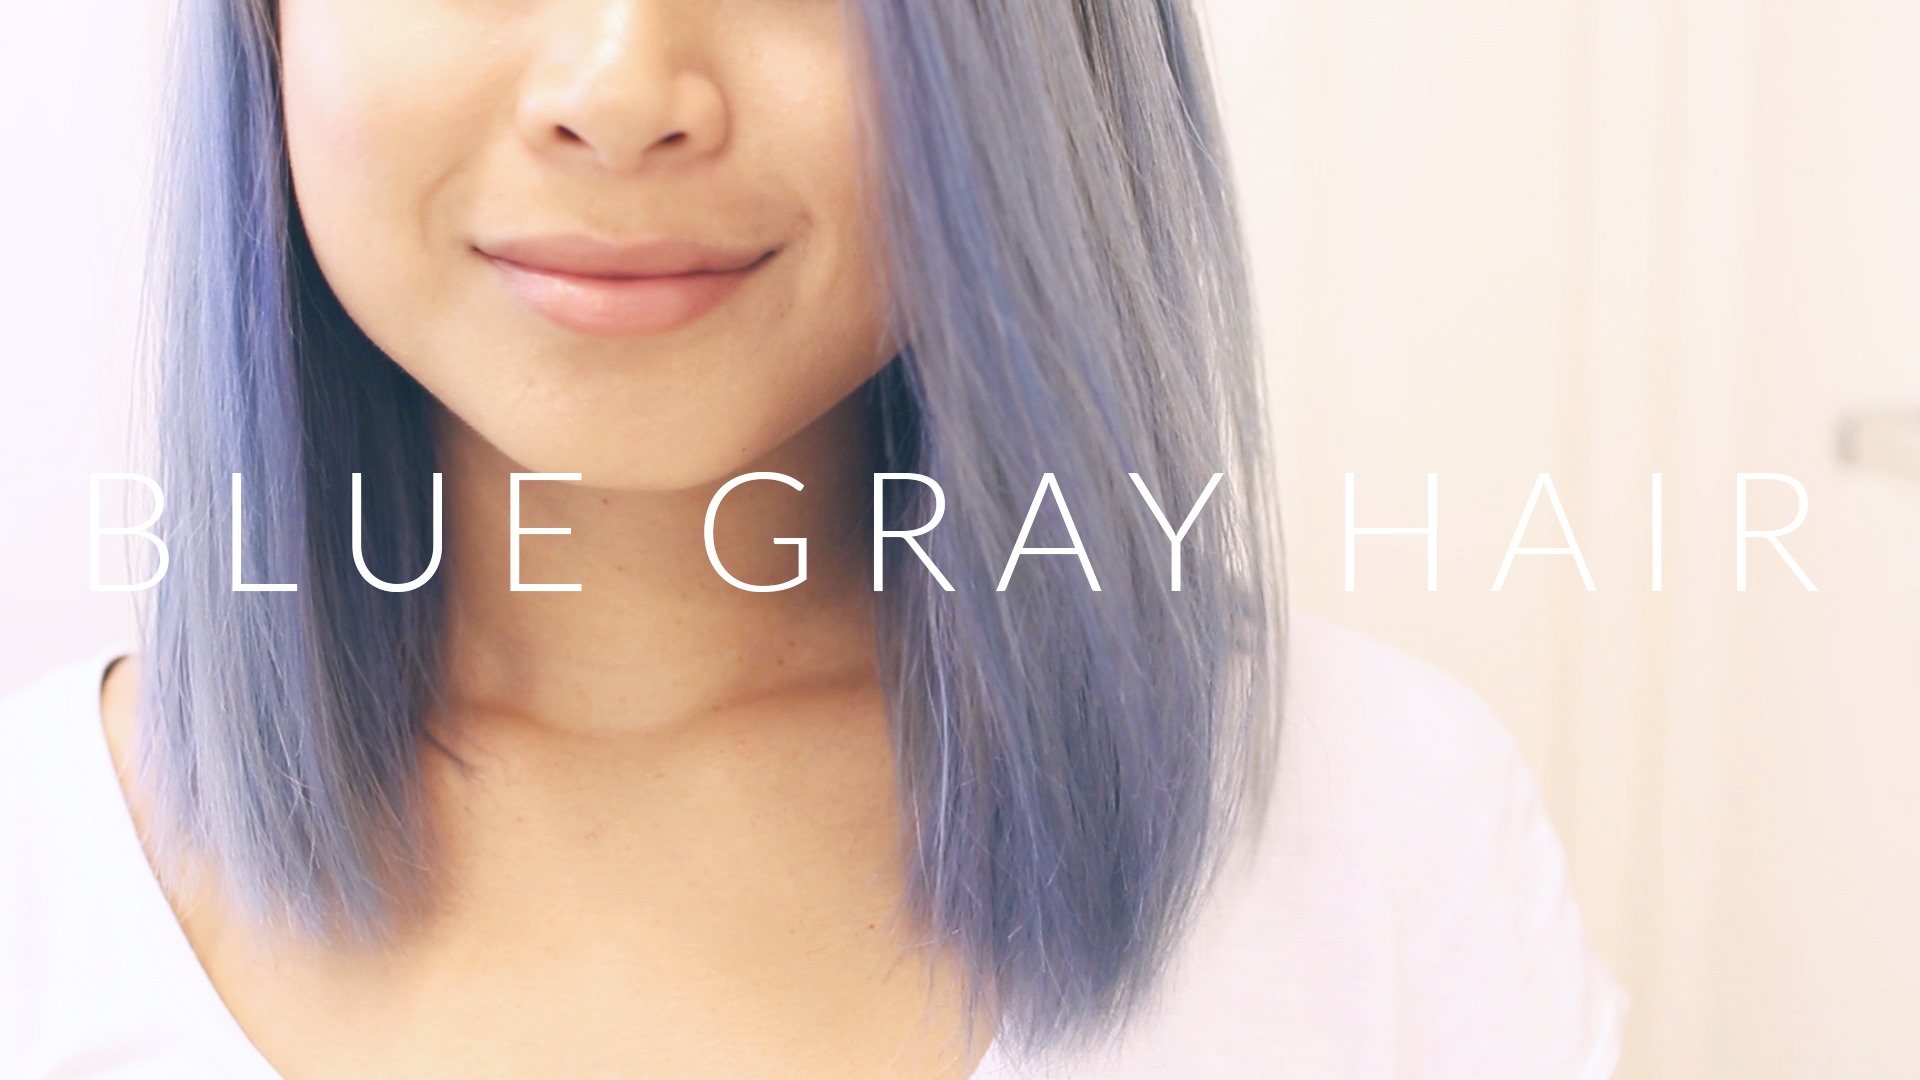 Blue Gray Hair Extensions - Sally Beauty - wide 4